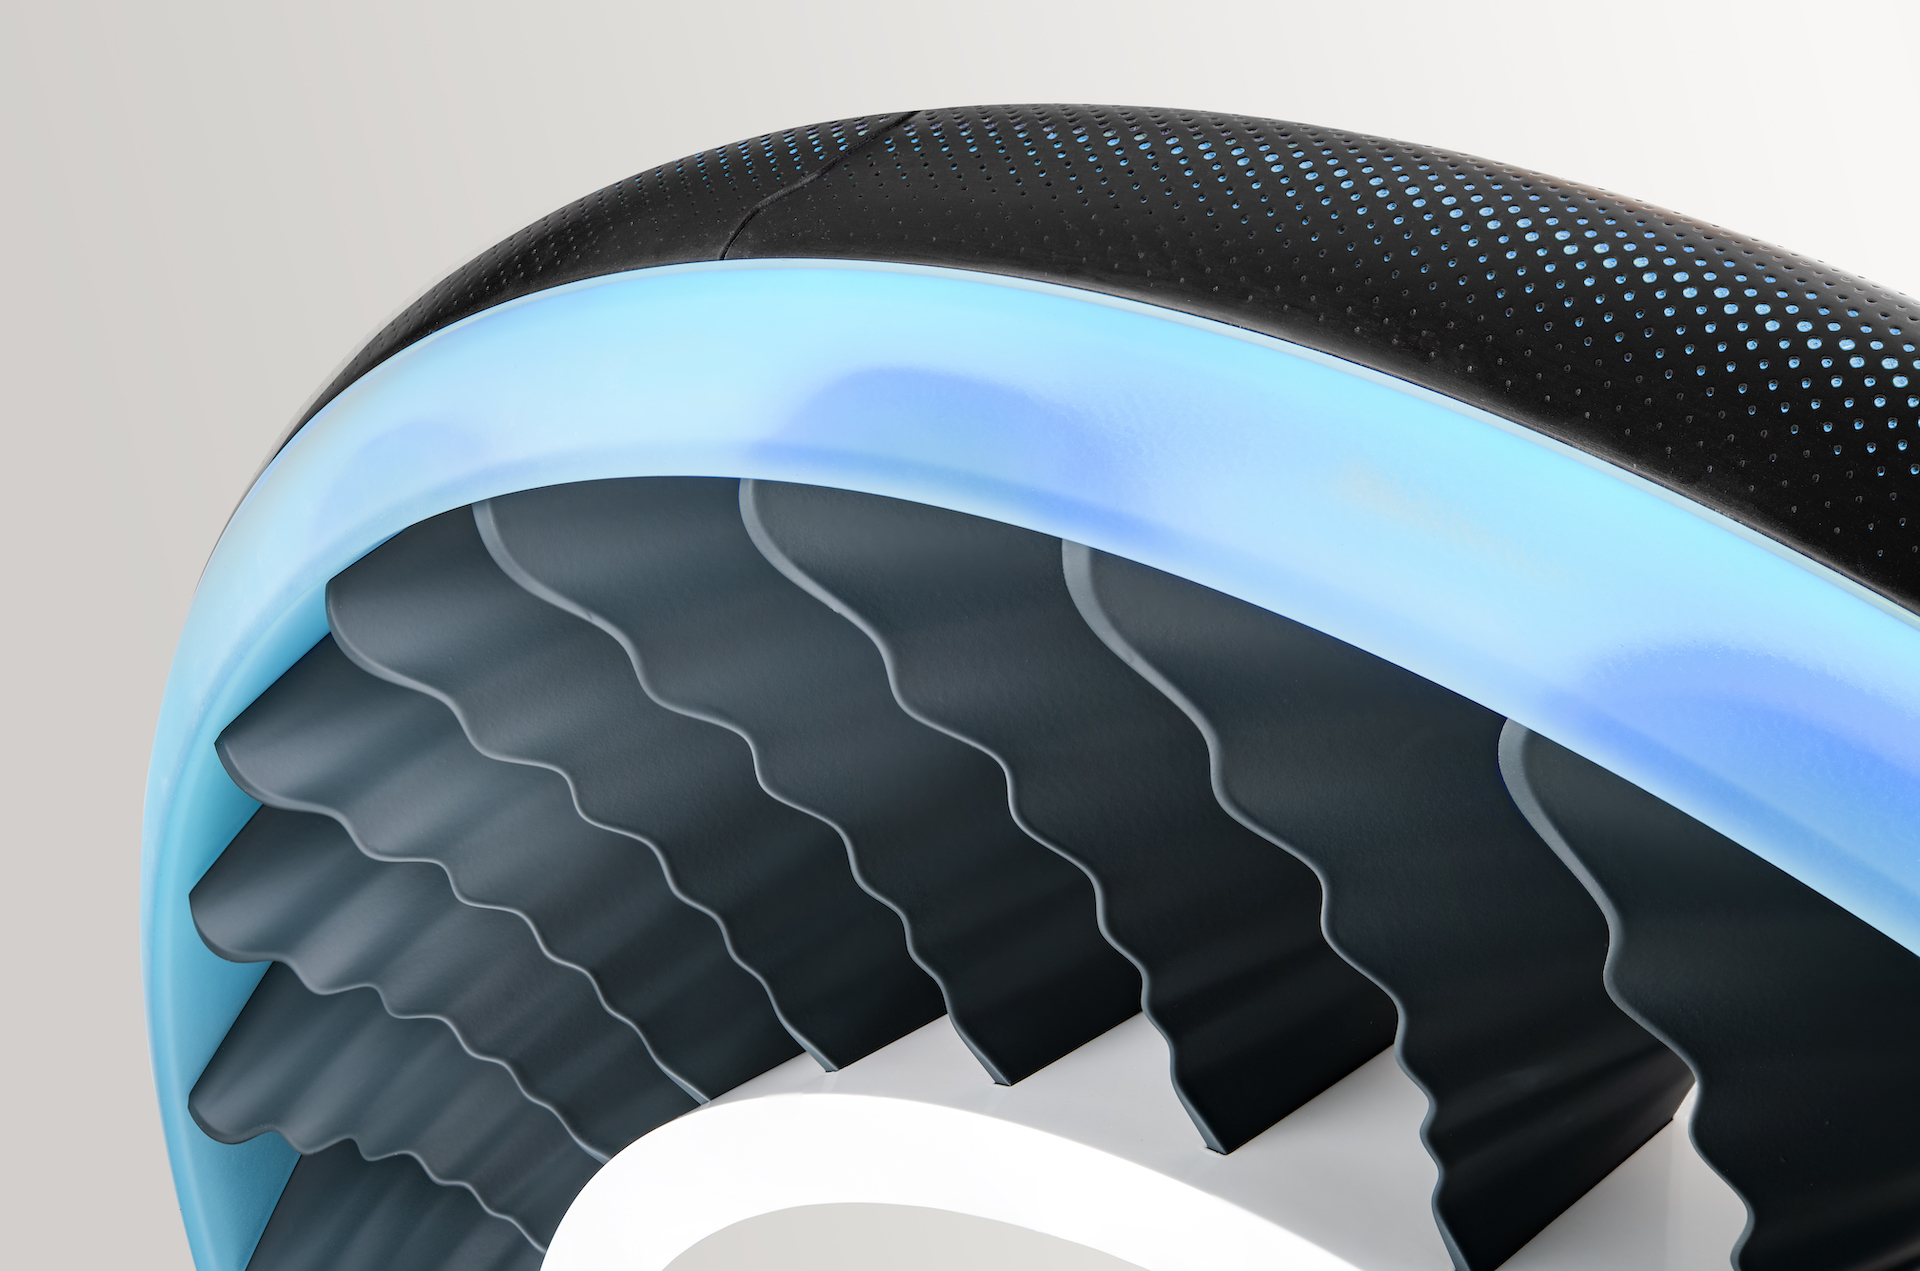 This Goodyear concept tire called the Aero would serve both as an airless tire and propeller for flying cars of the future. | Goodyear photos